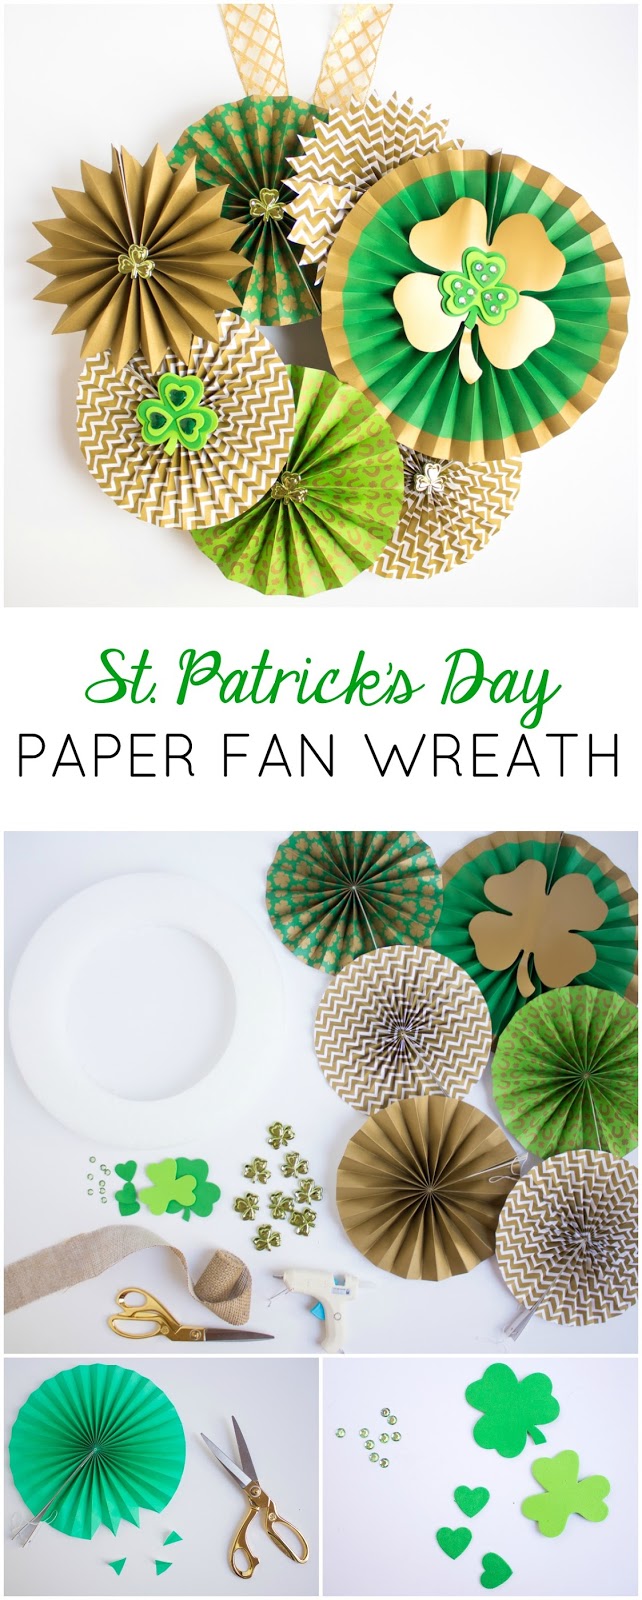 The prettiest St. Patrick's Day shamrock wreath you ever did see!